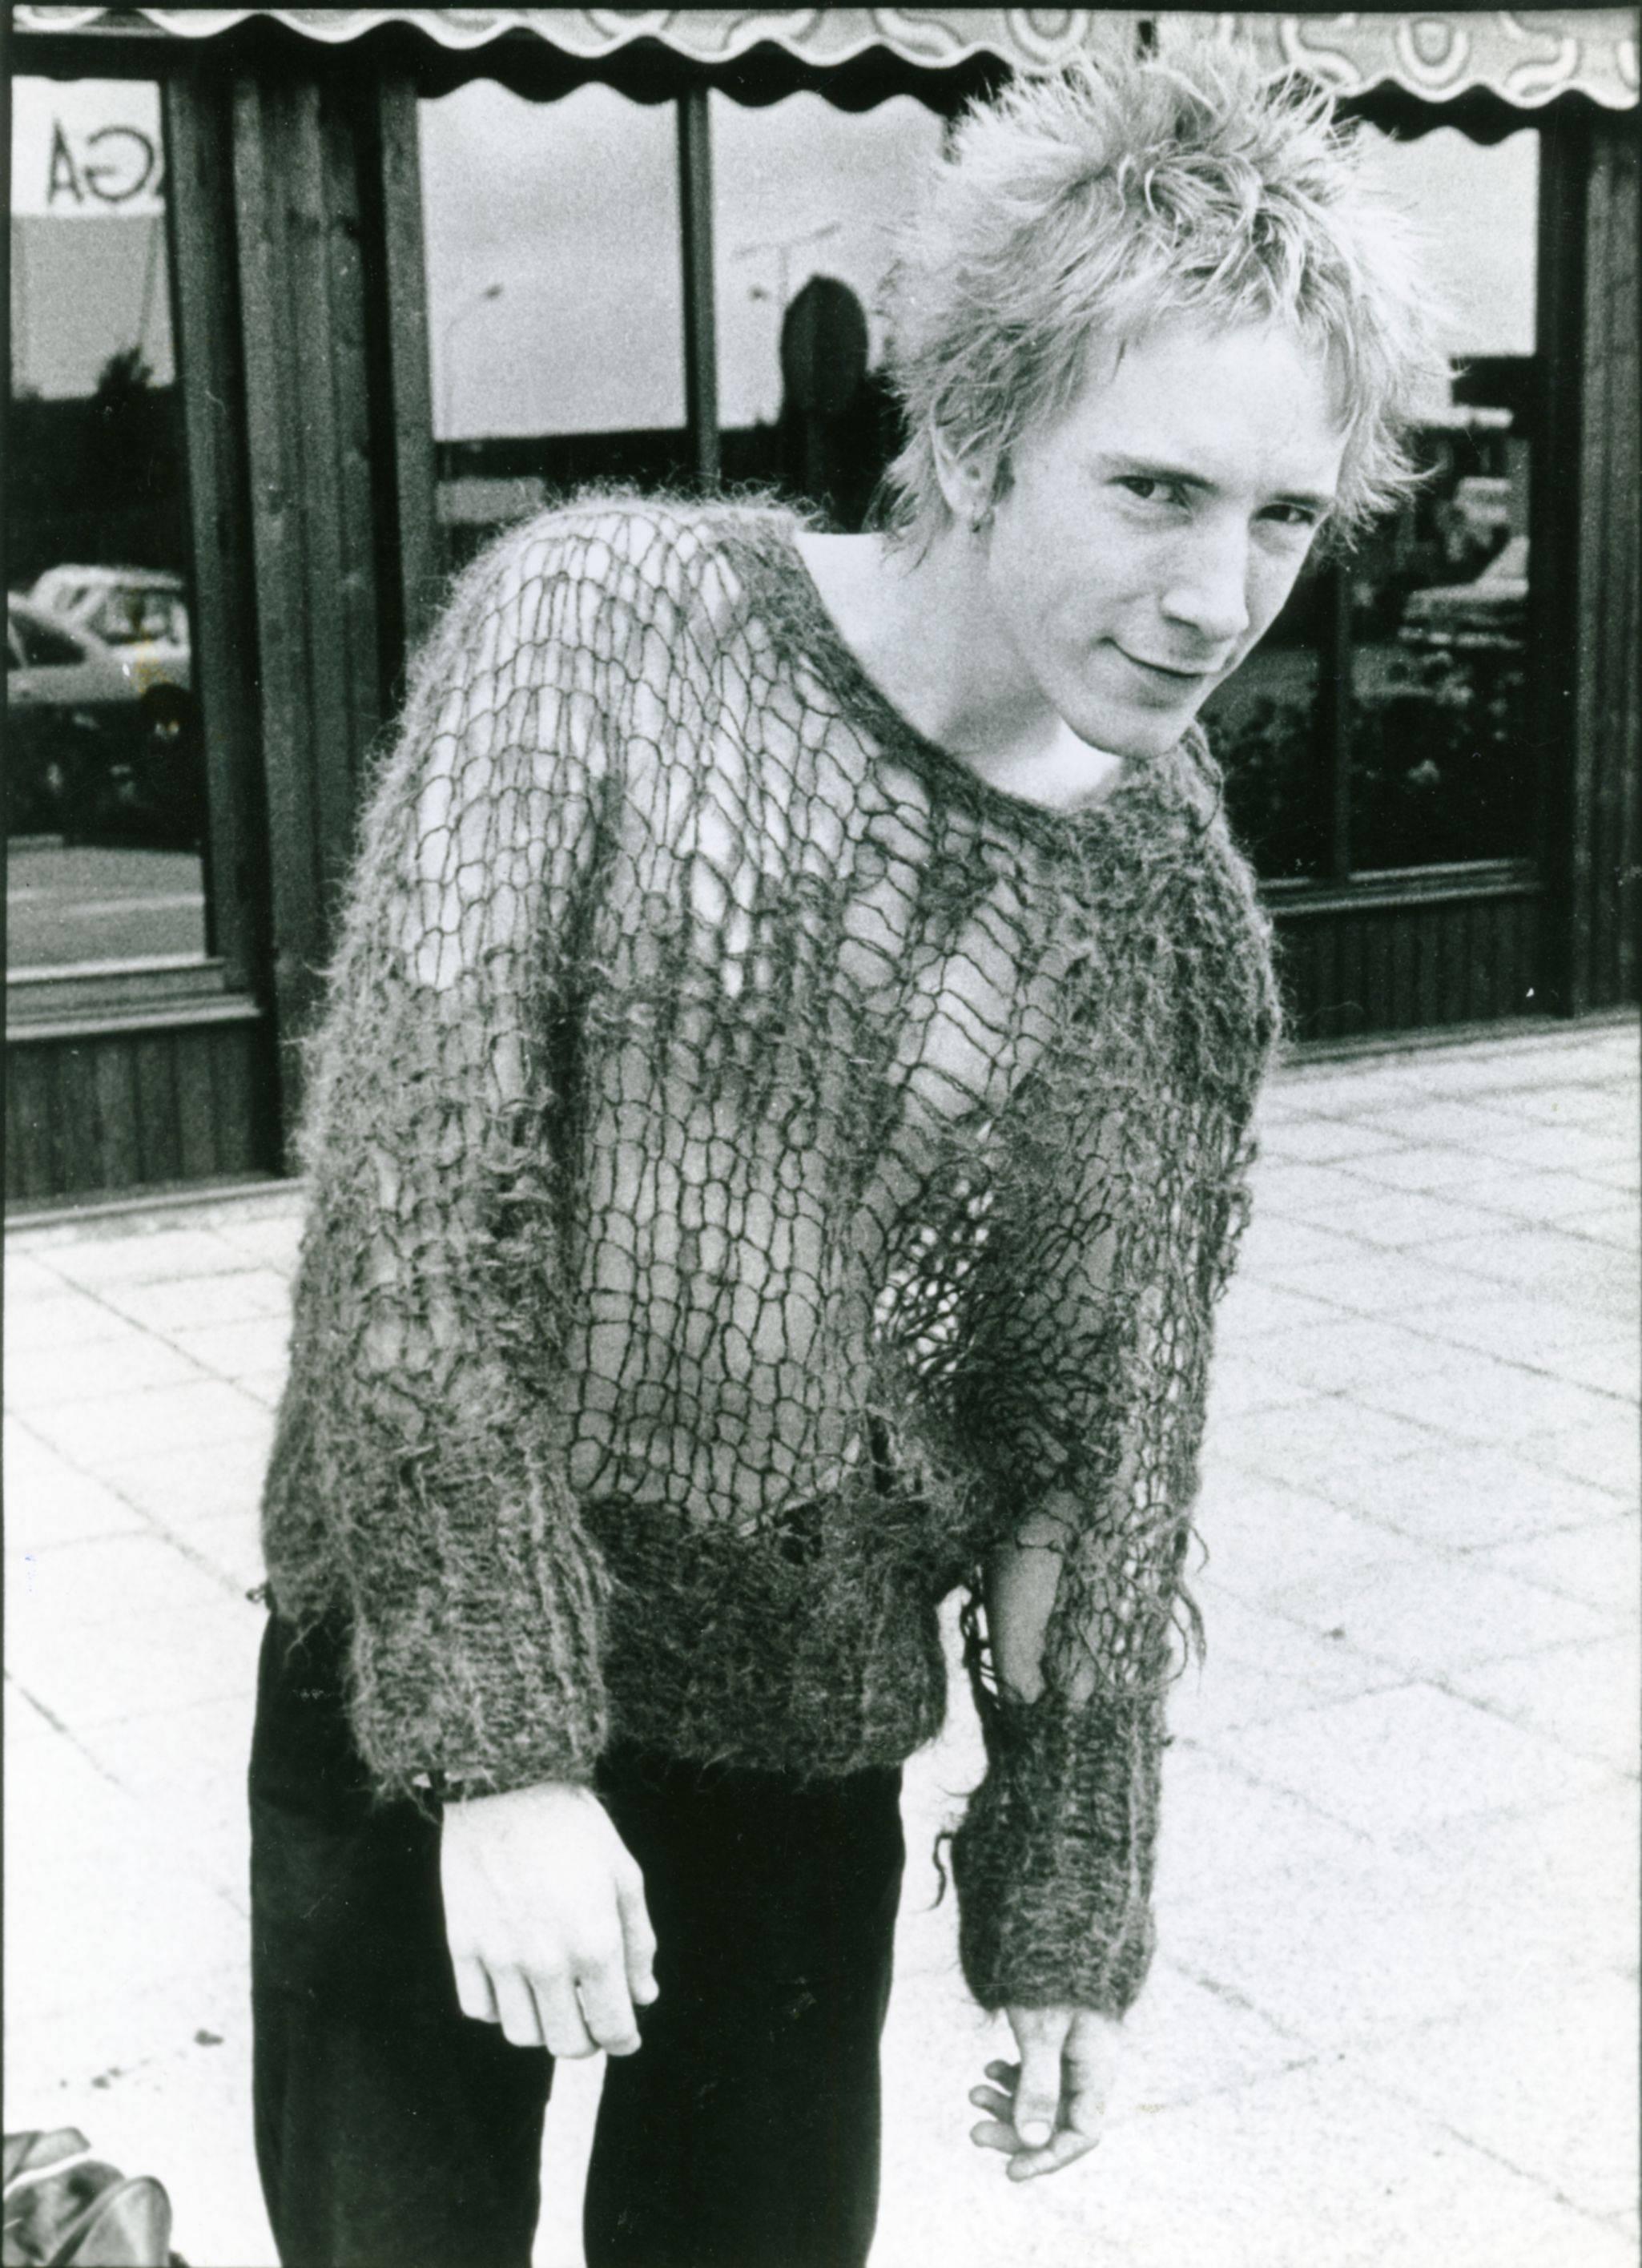 Unknown Black and White Photograph - Johnny Rotten of The Sex Pistols Candid Vintage Original Photograph